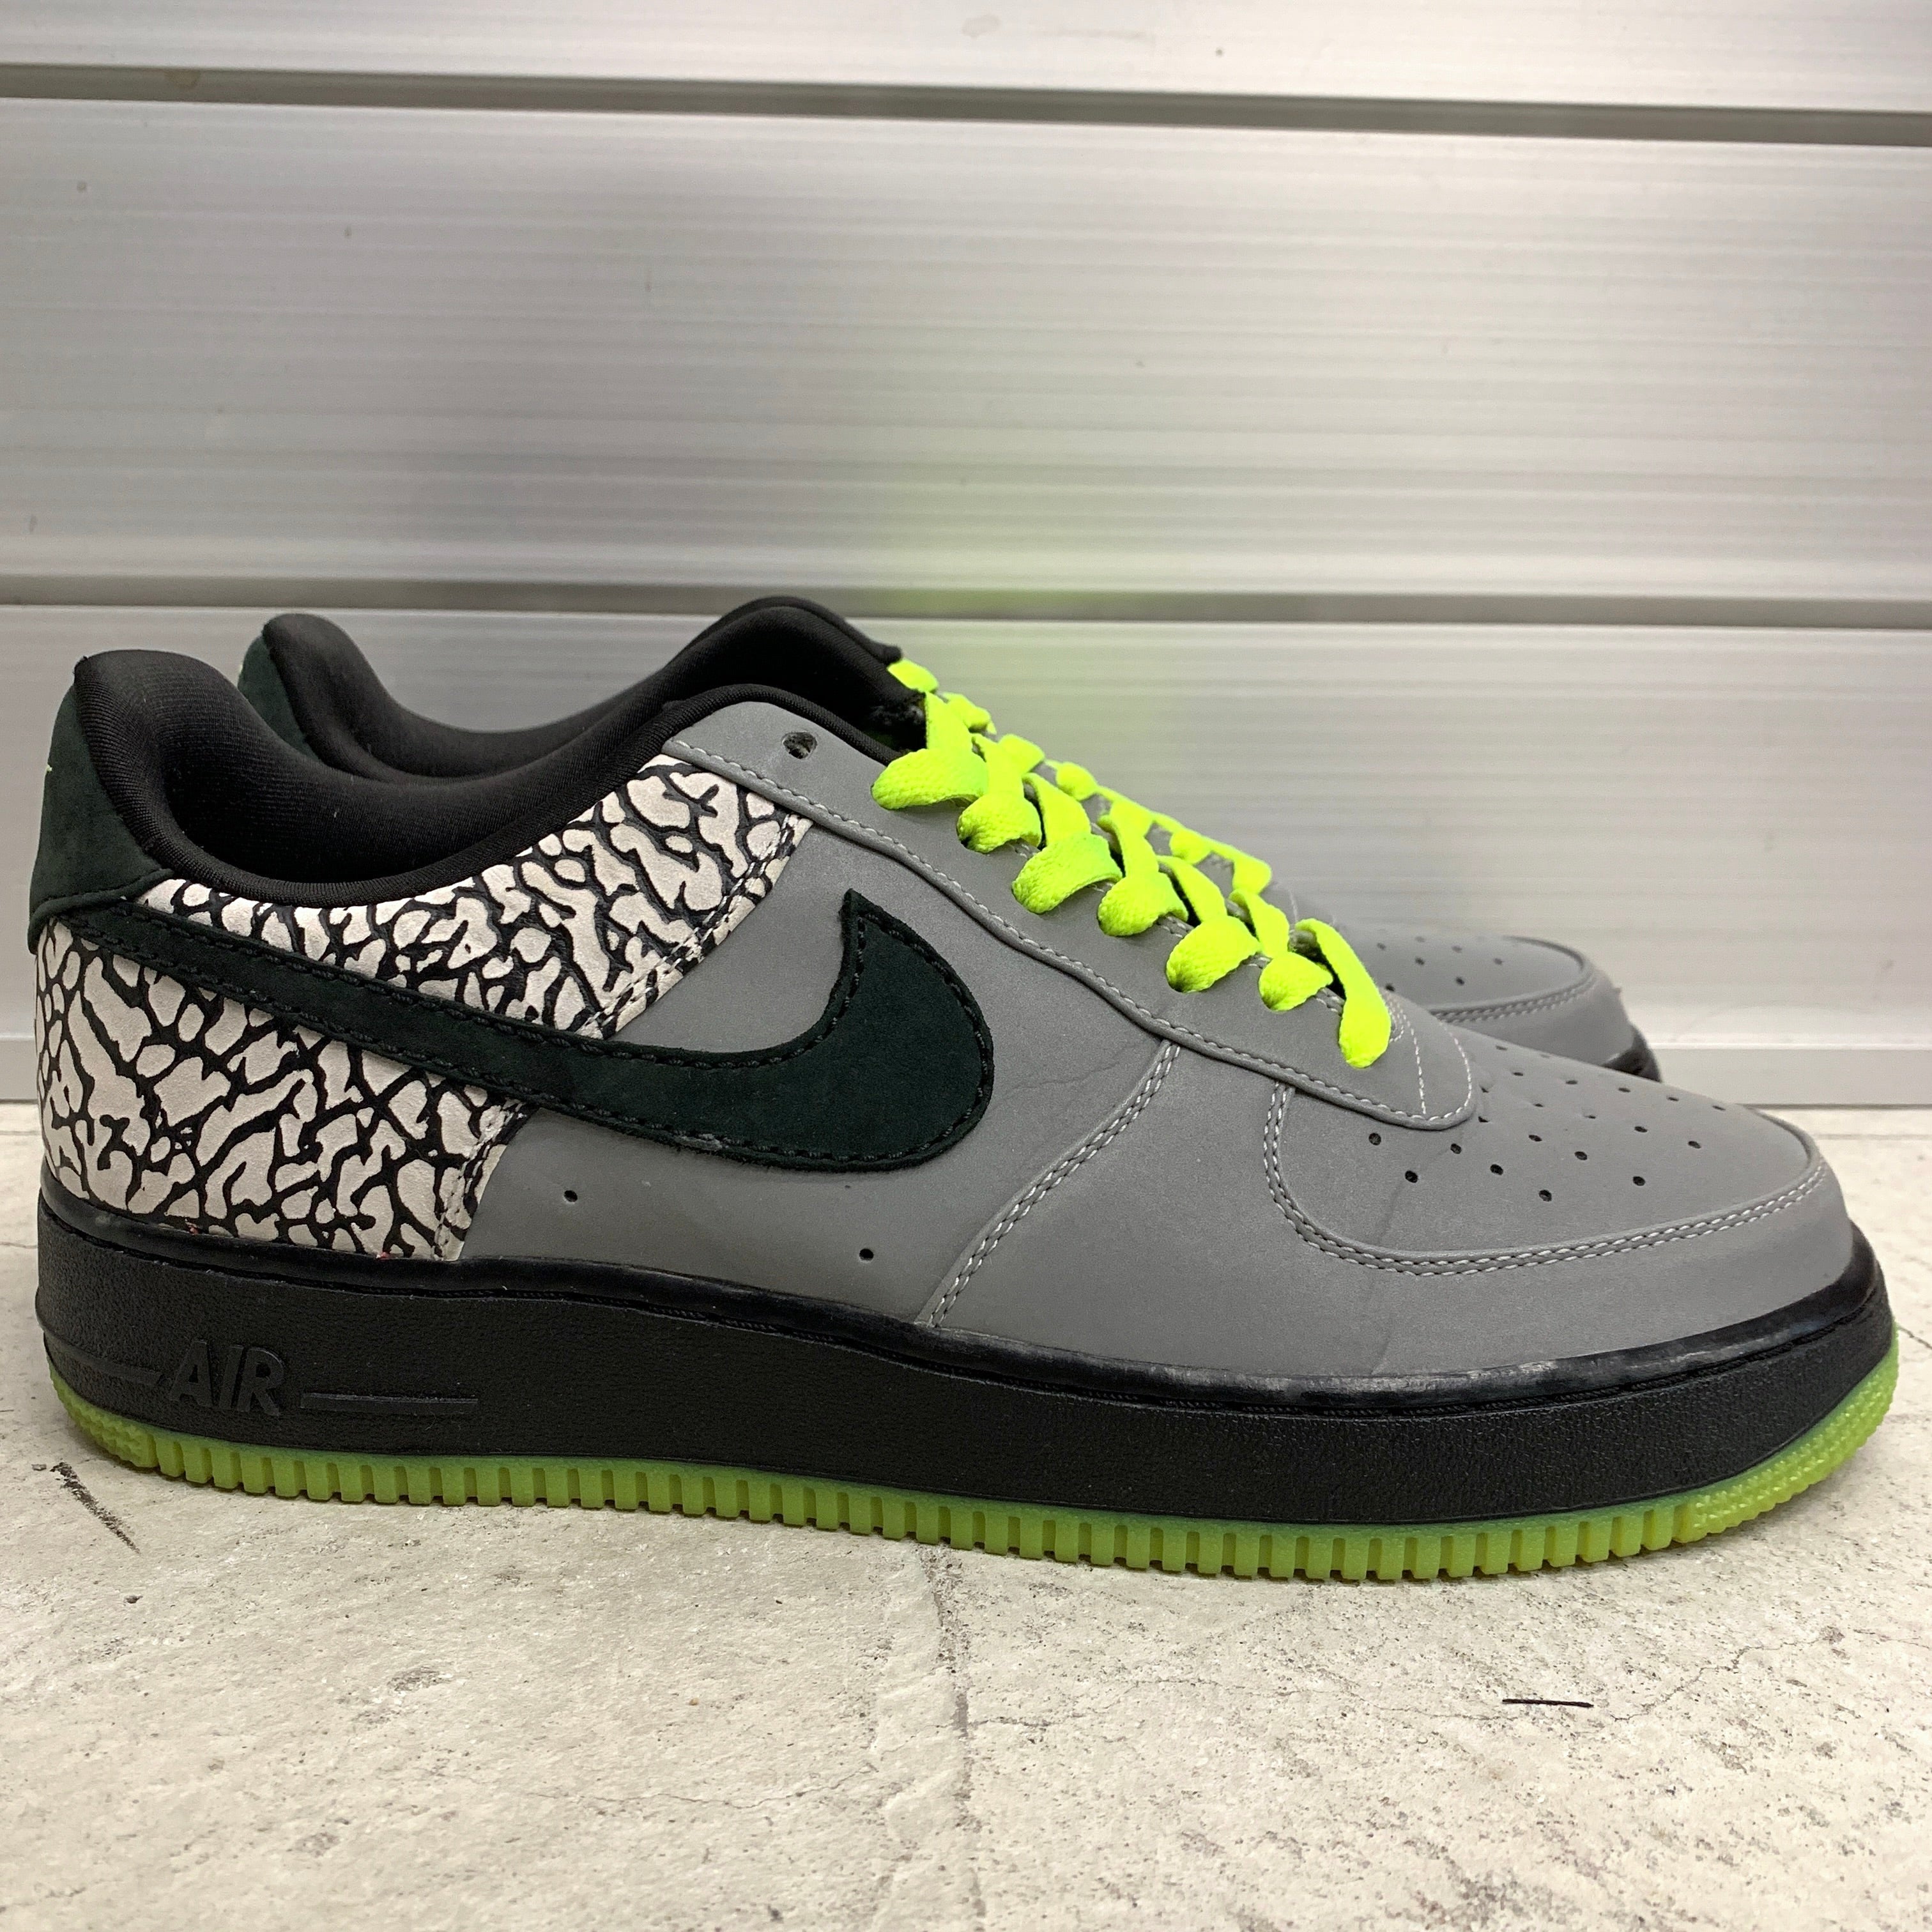 Nike Air Force 1 Low Retro Cocoa Snake 2018 - Stadium Goods